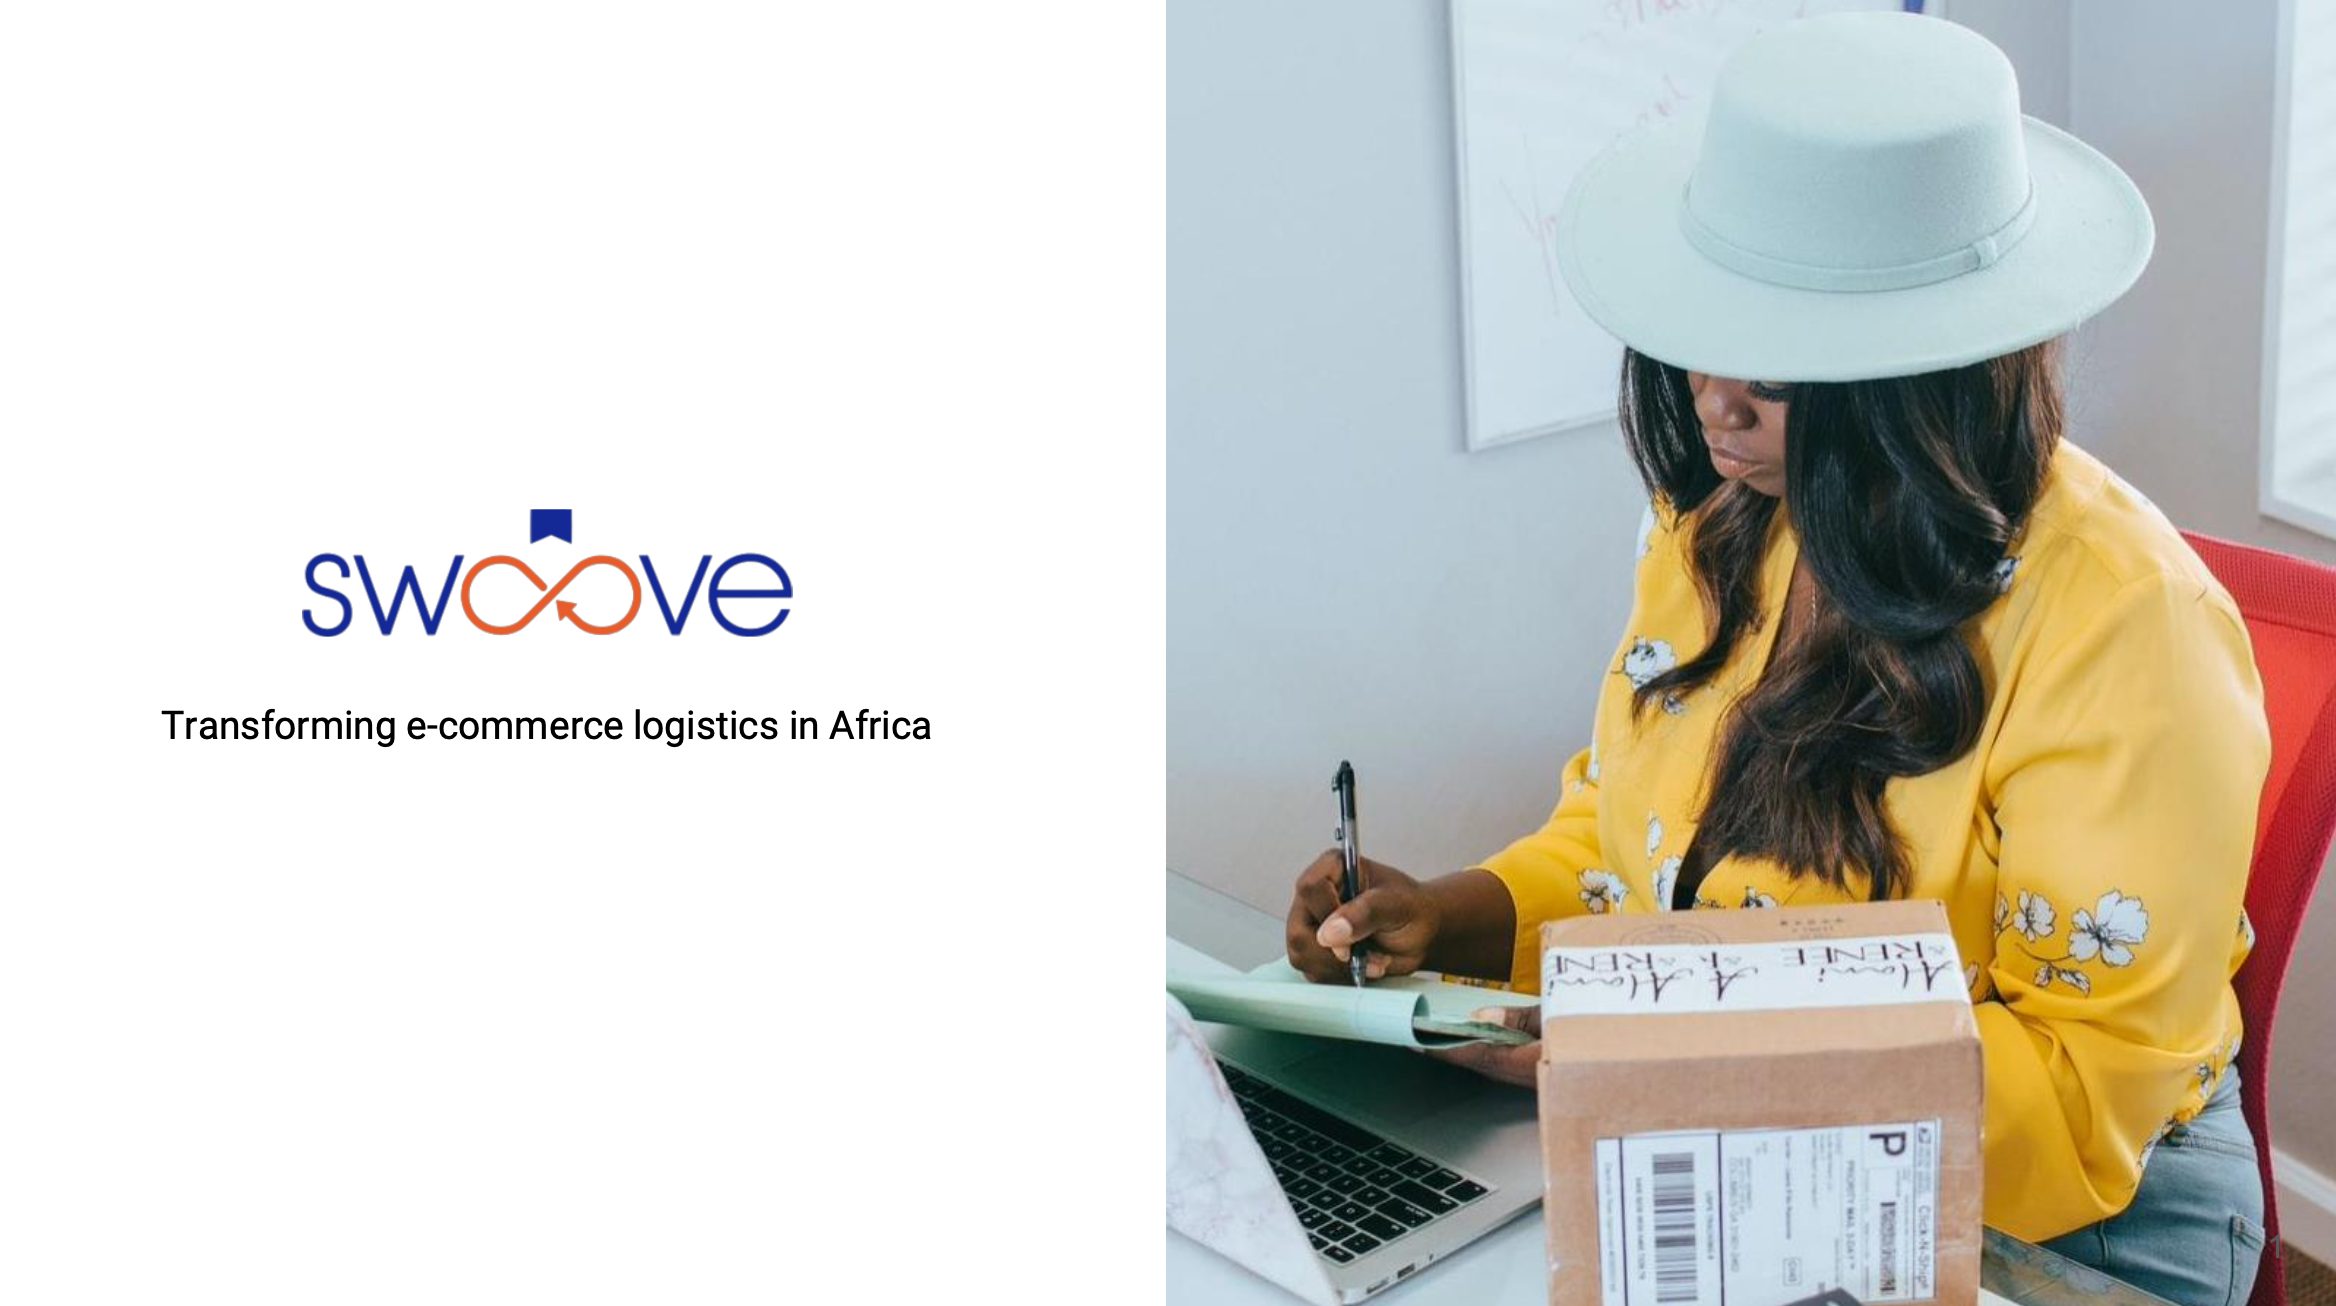 SWOOVE : Transforming E-Commerce Logistics in Africa